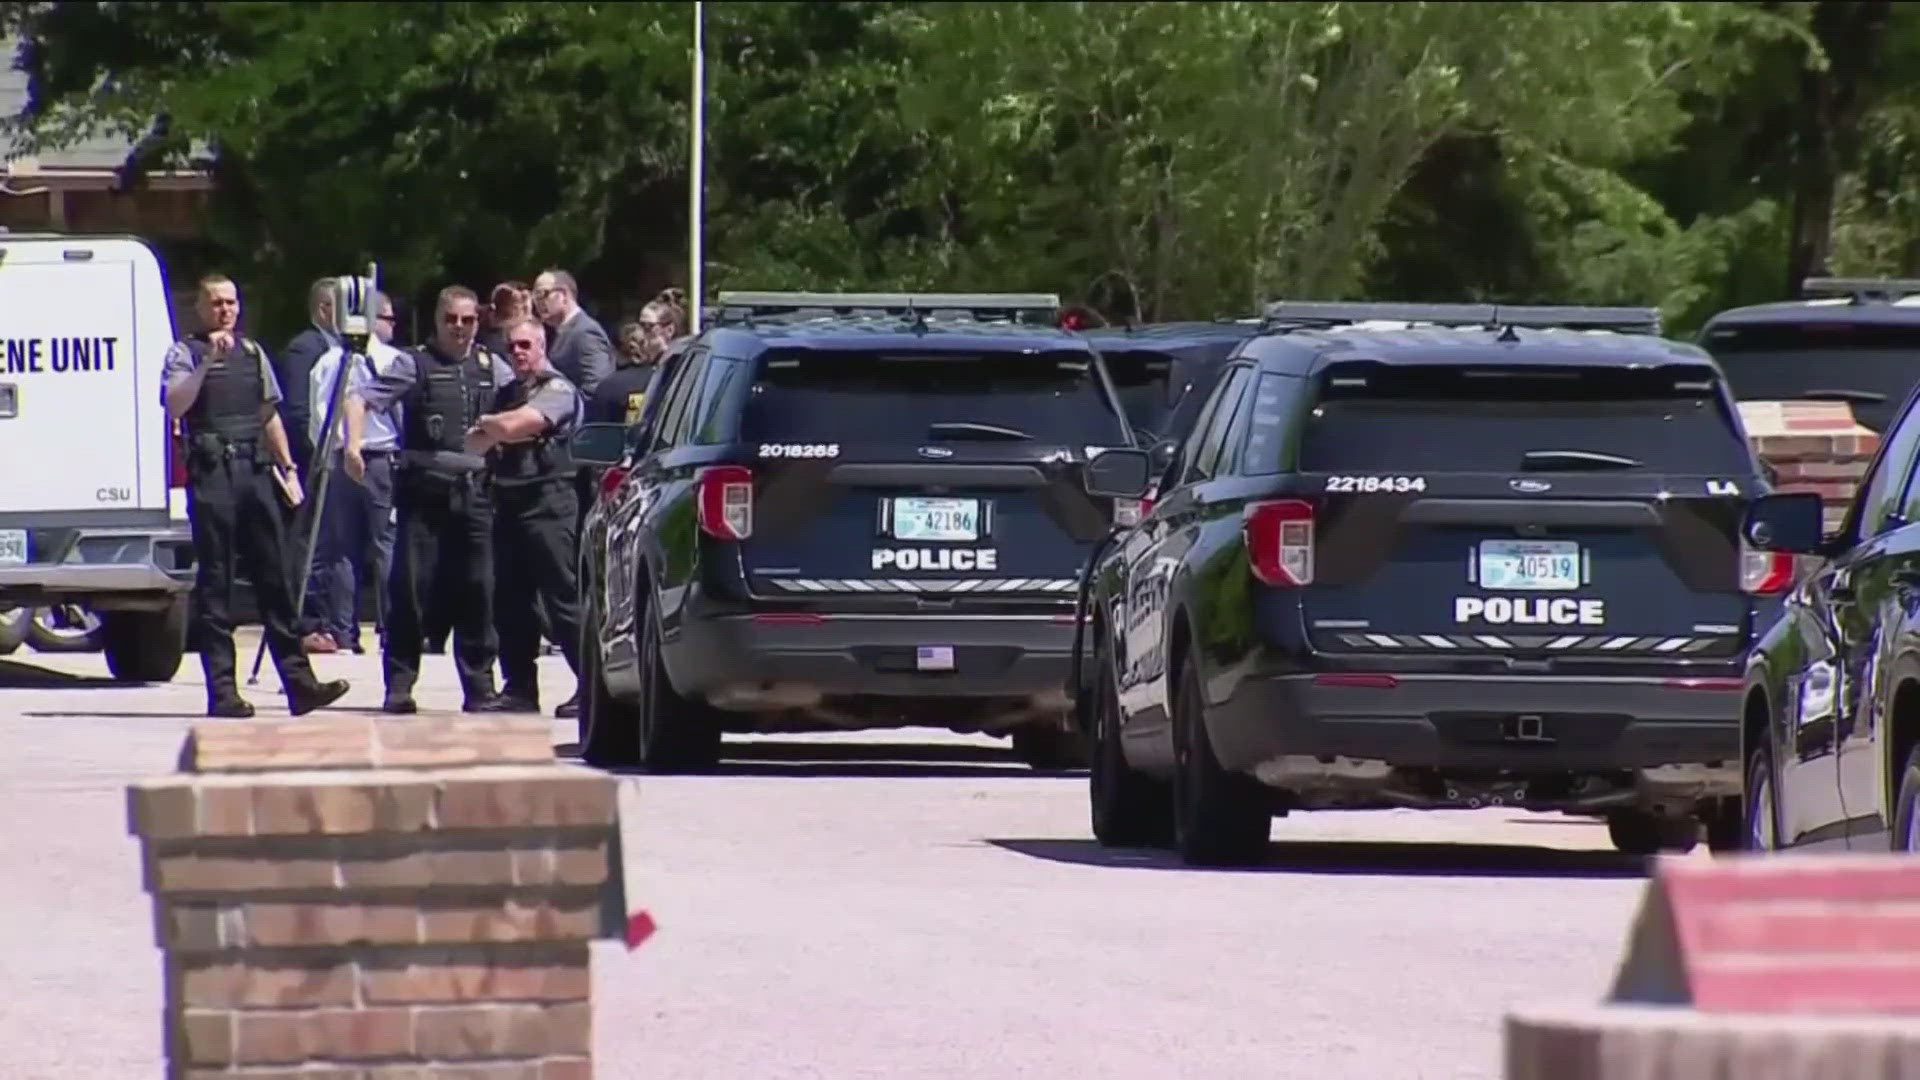 Five people were found dead in a southwest Oklahoma City home.